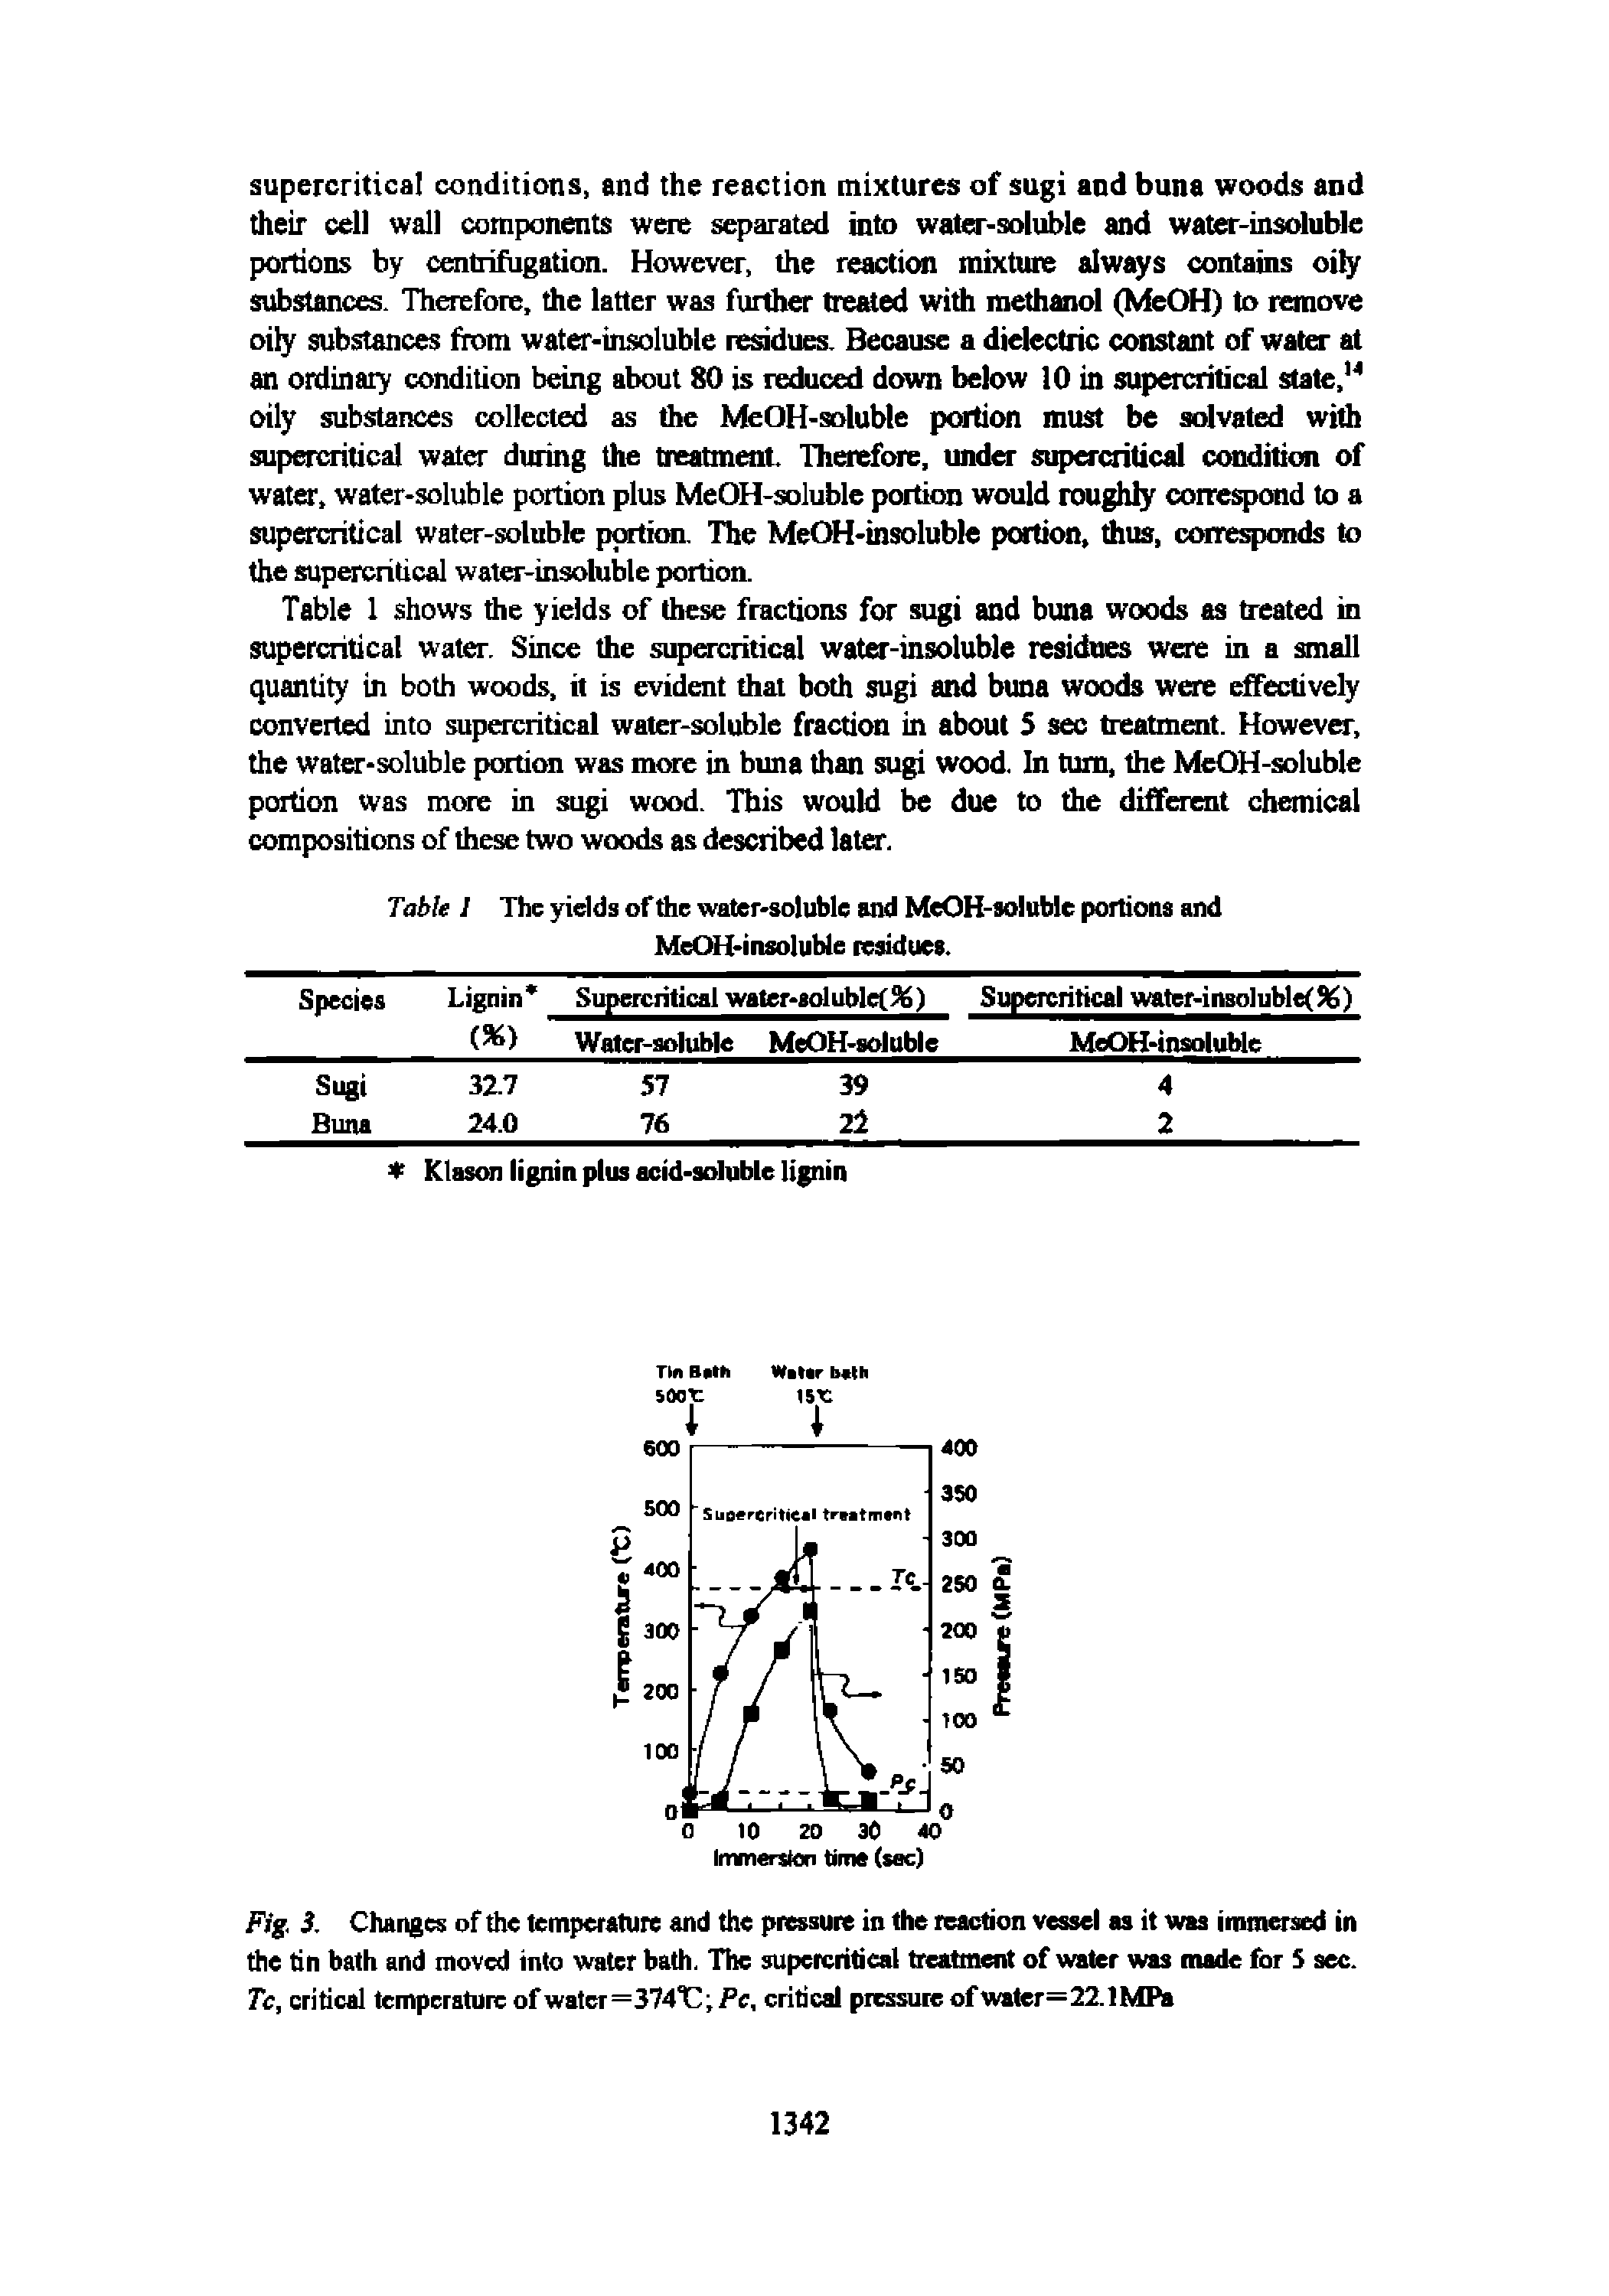 Fig. 3. Changes of the temperature and the pressure in the reaction vessel as it was immersed in the tin bath and moved into water bath. The supercritical treatment of water was made for S sec. Tc, critical temperature of water=374 0 Fc, critical pressure of water=22.1 MPa...